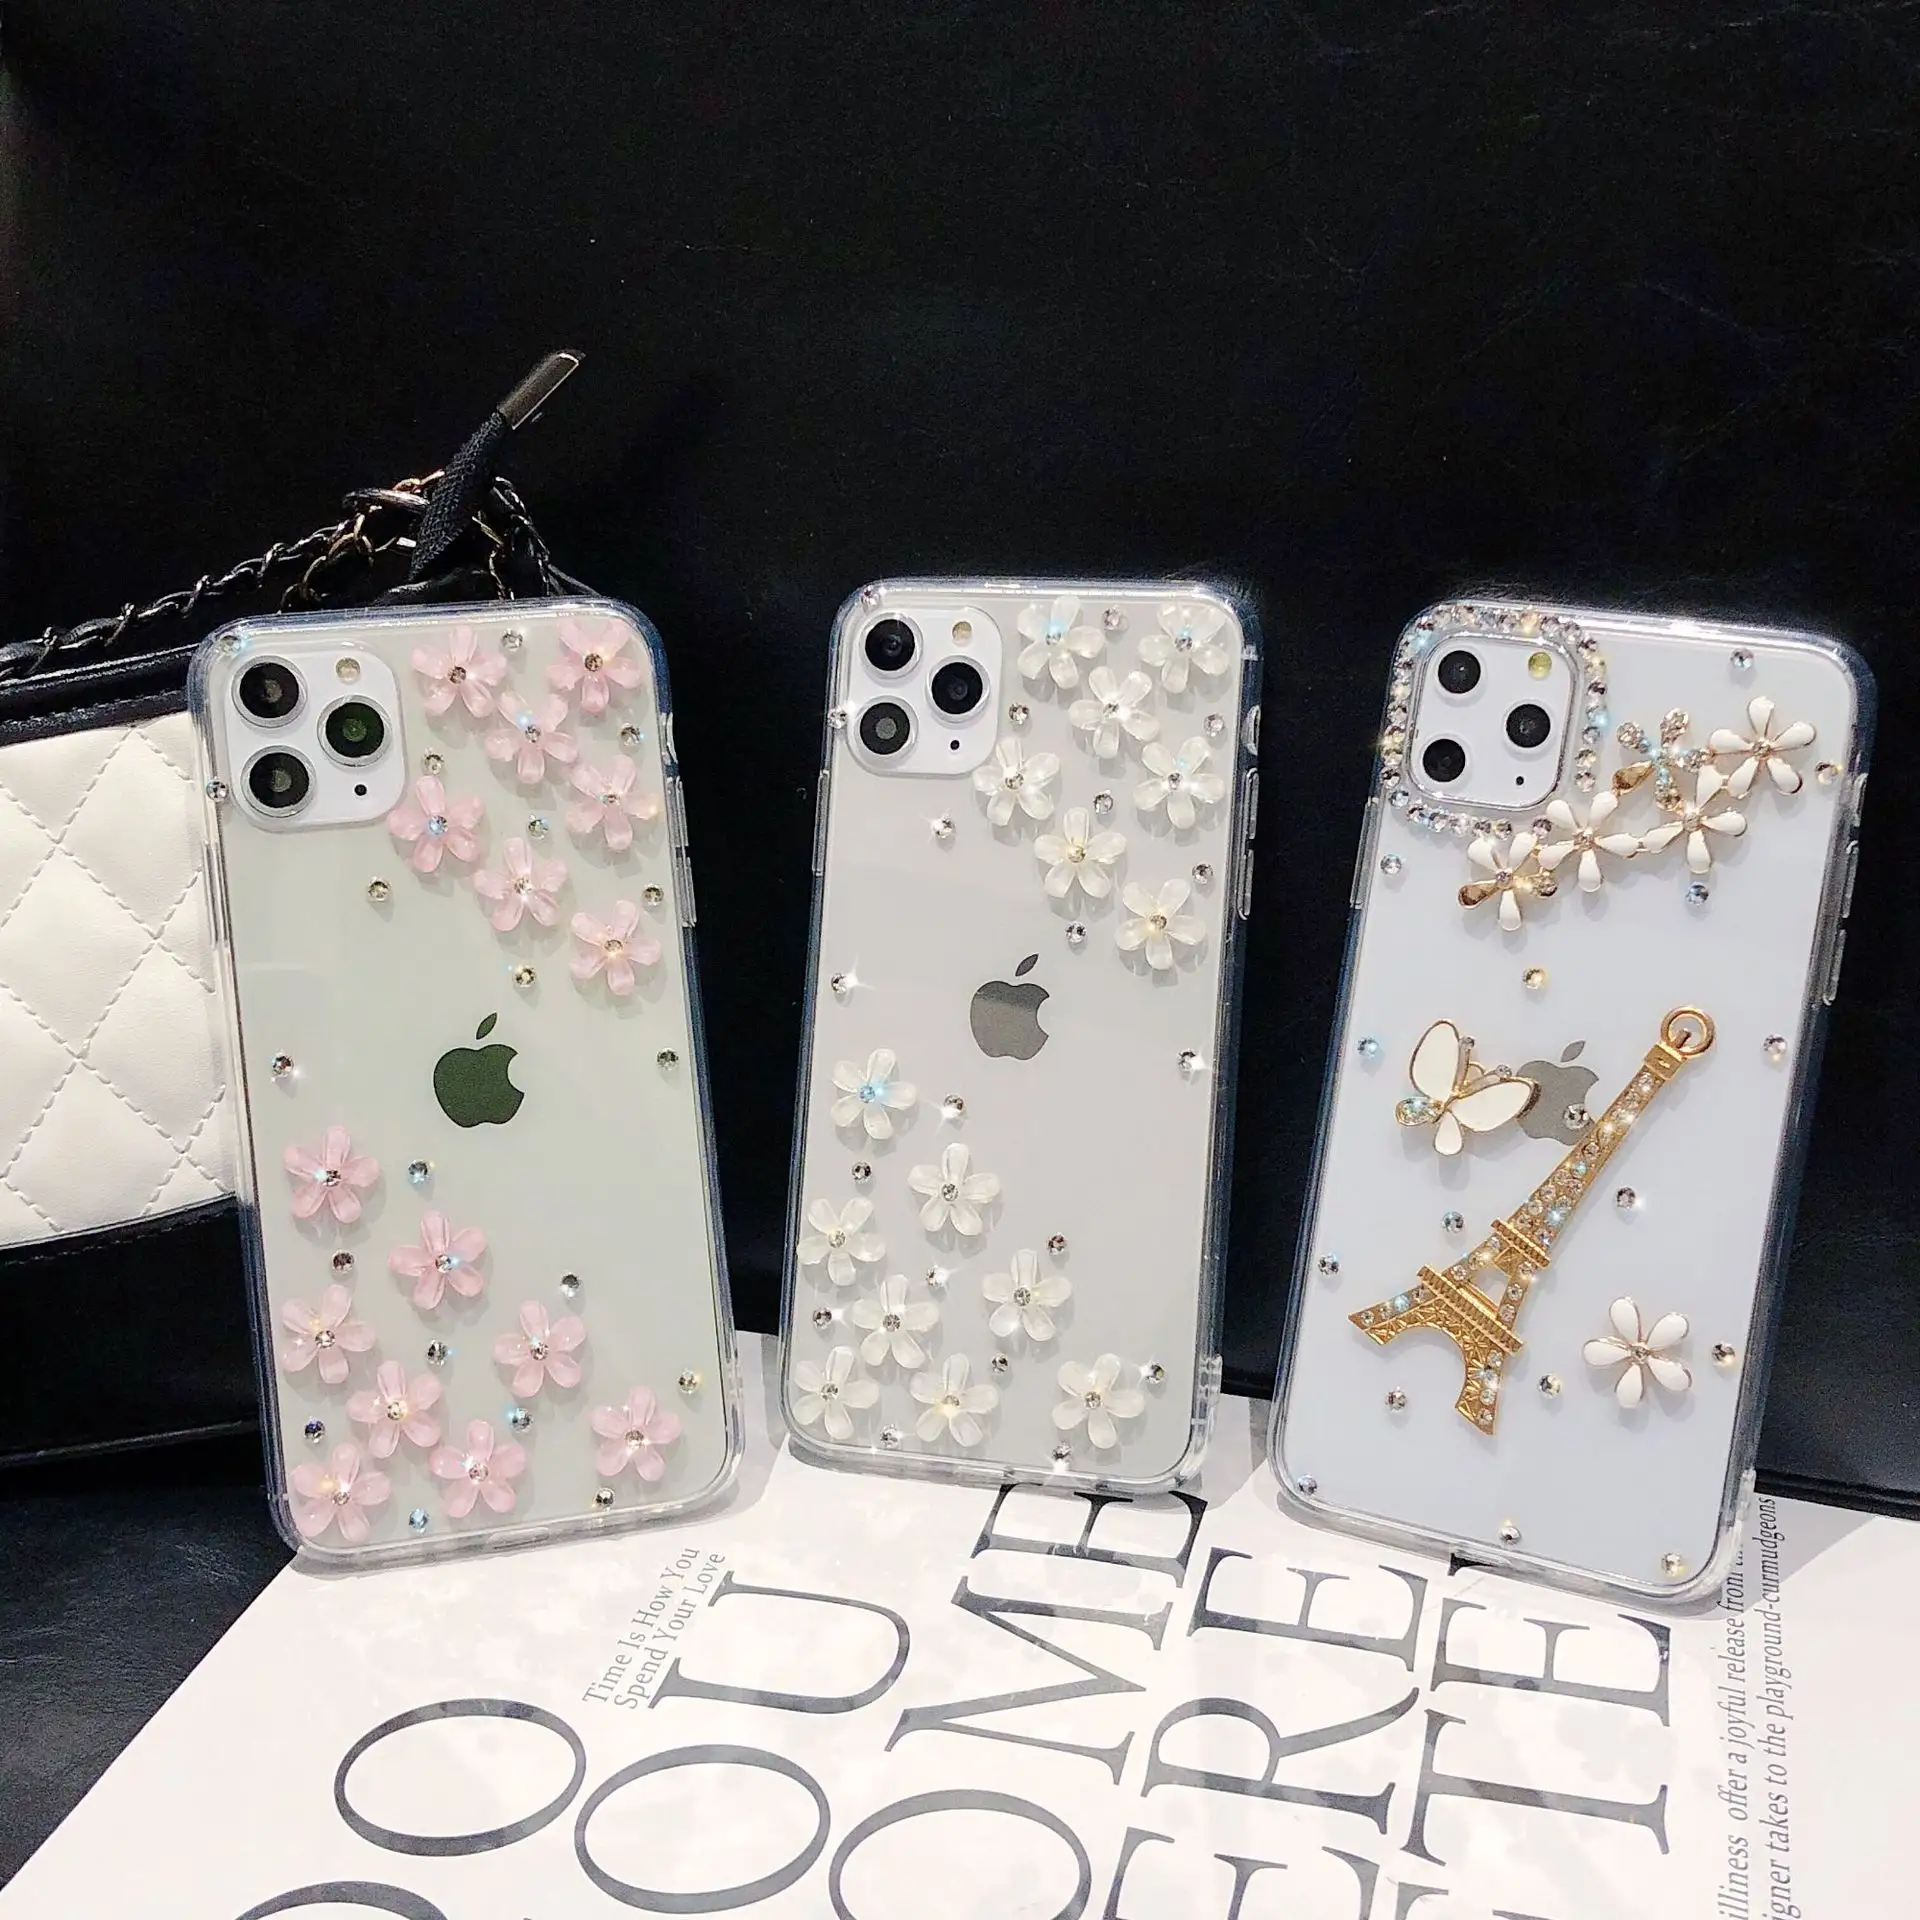 Mobile case covers for iPhone 11 pro max Bling Diamond 3D Flowers CellPhone Case for iPhone X 8 8 Plus